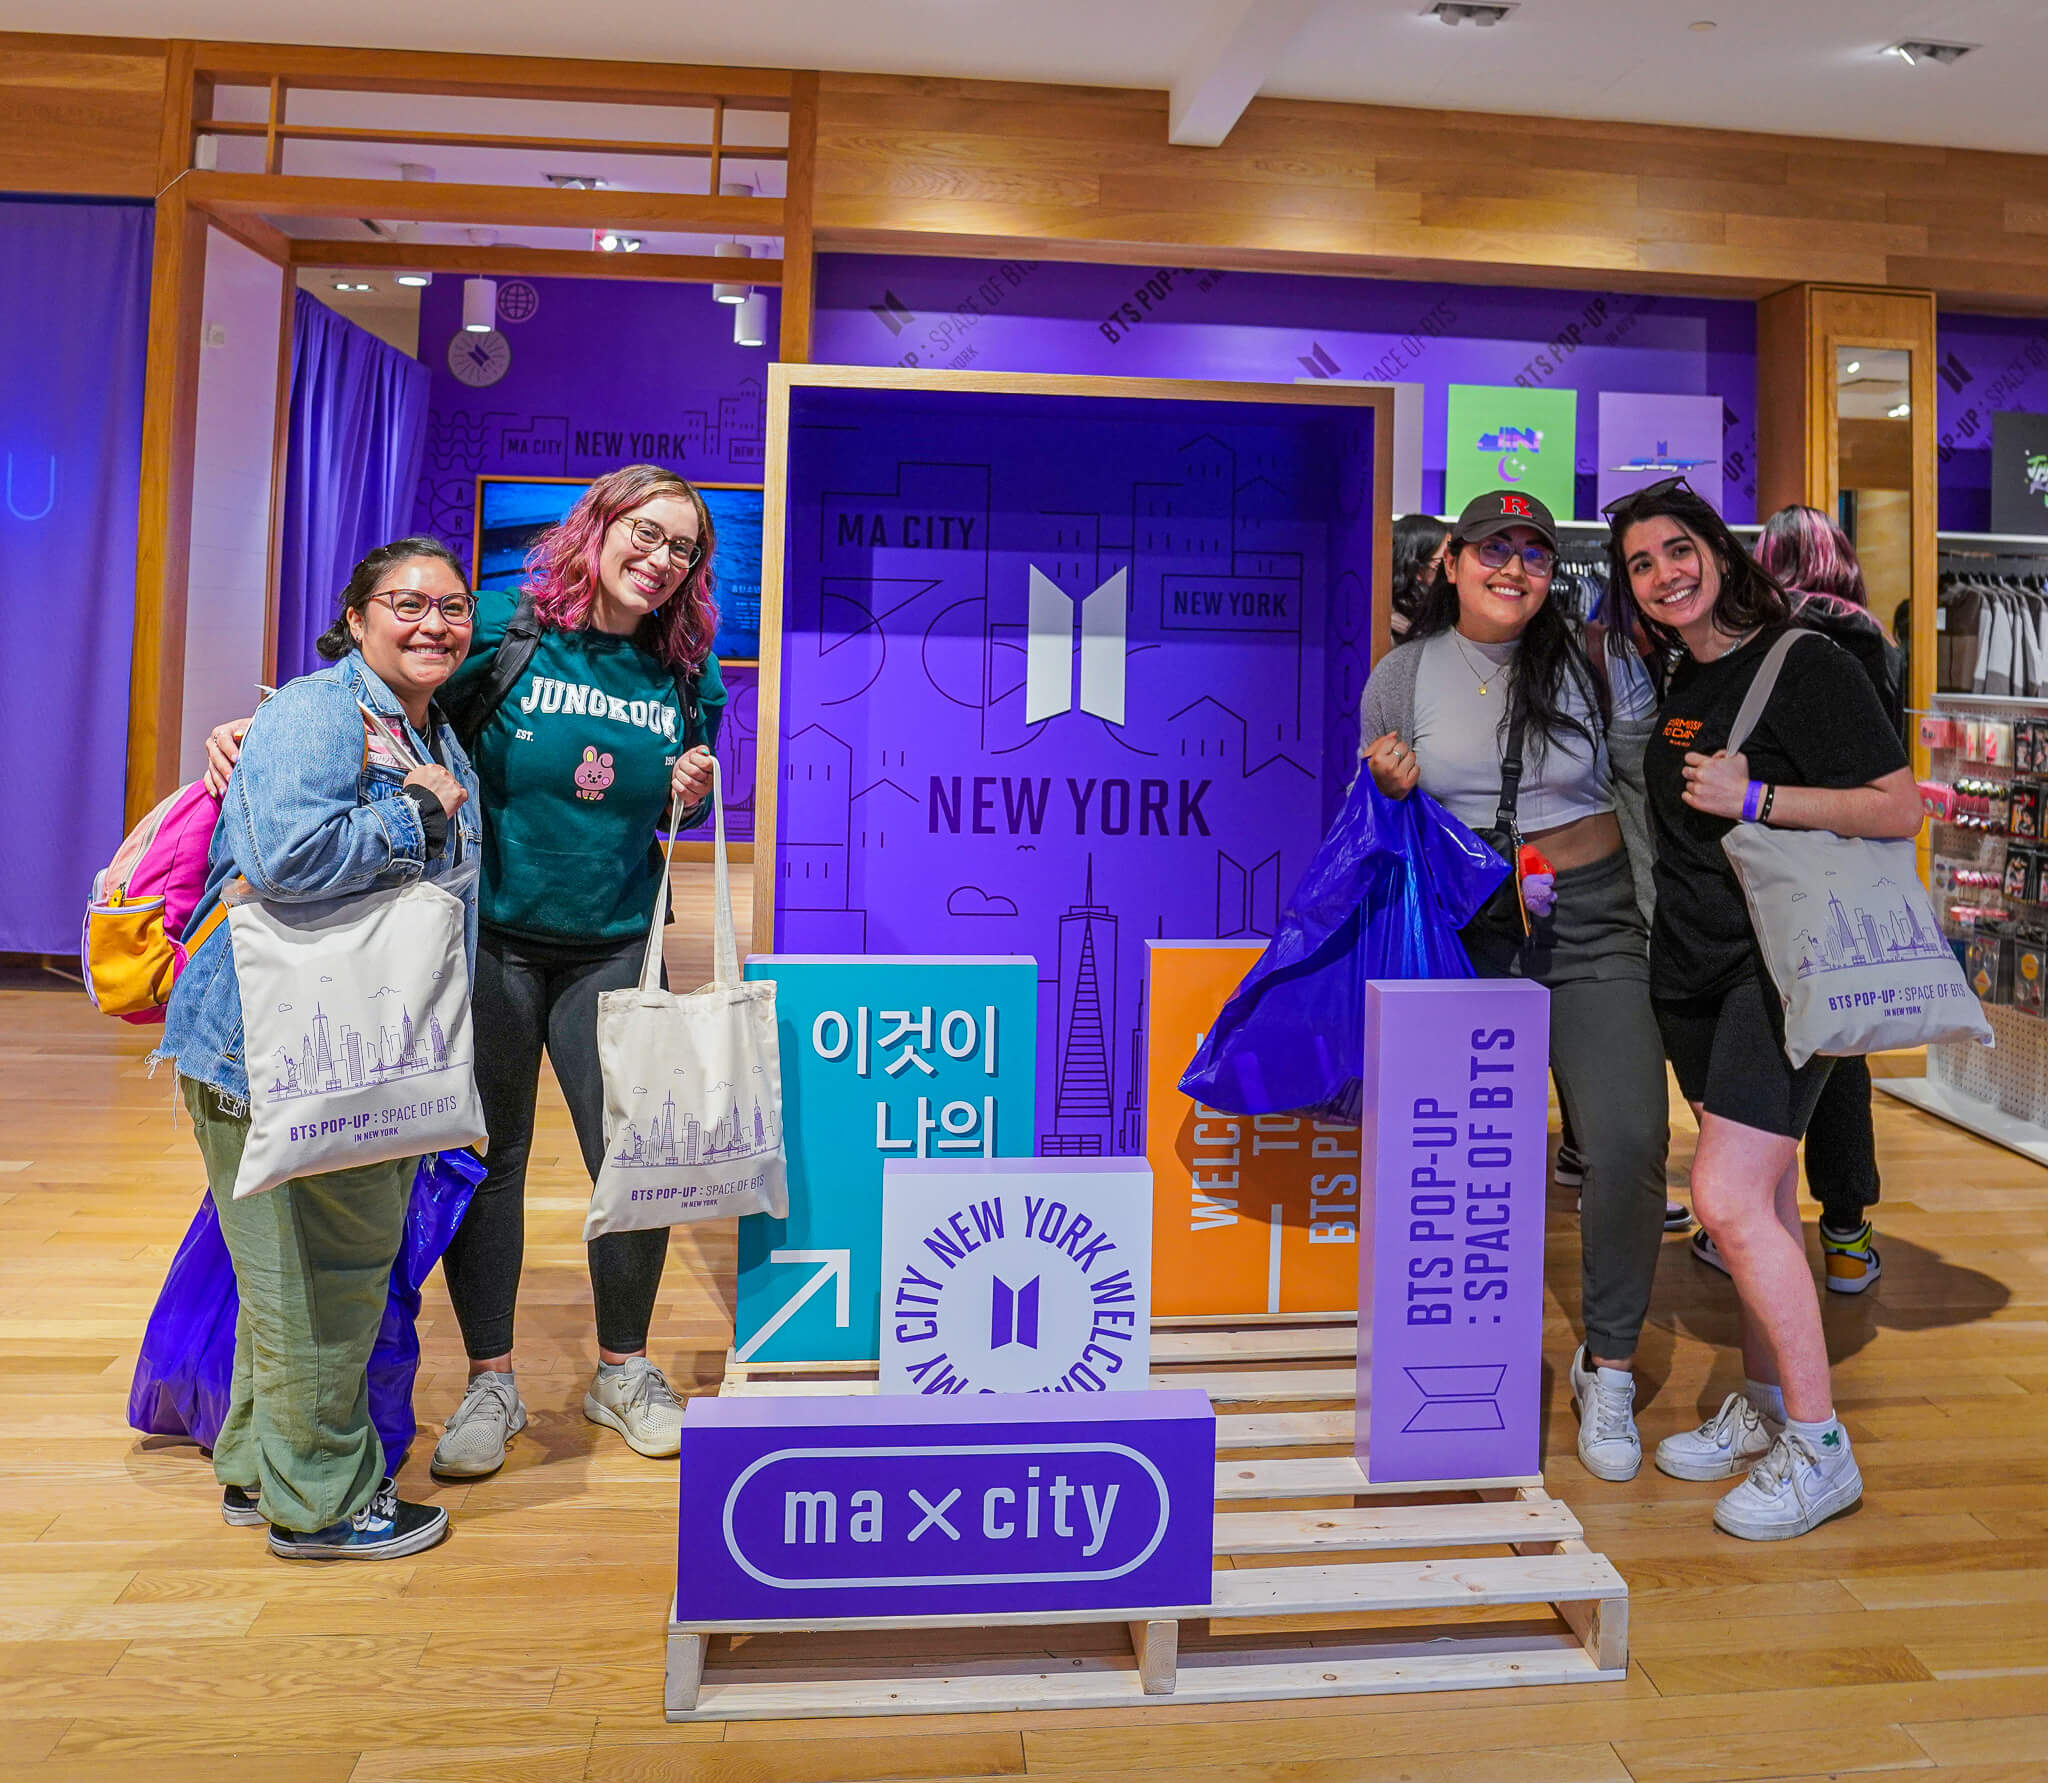 All about loving each other': BTS pop-up shop in Hudson Yards draws hundreds of fans | amNewYork